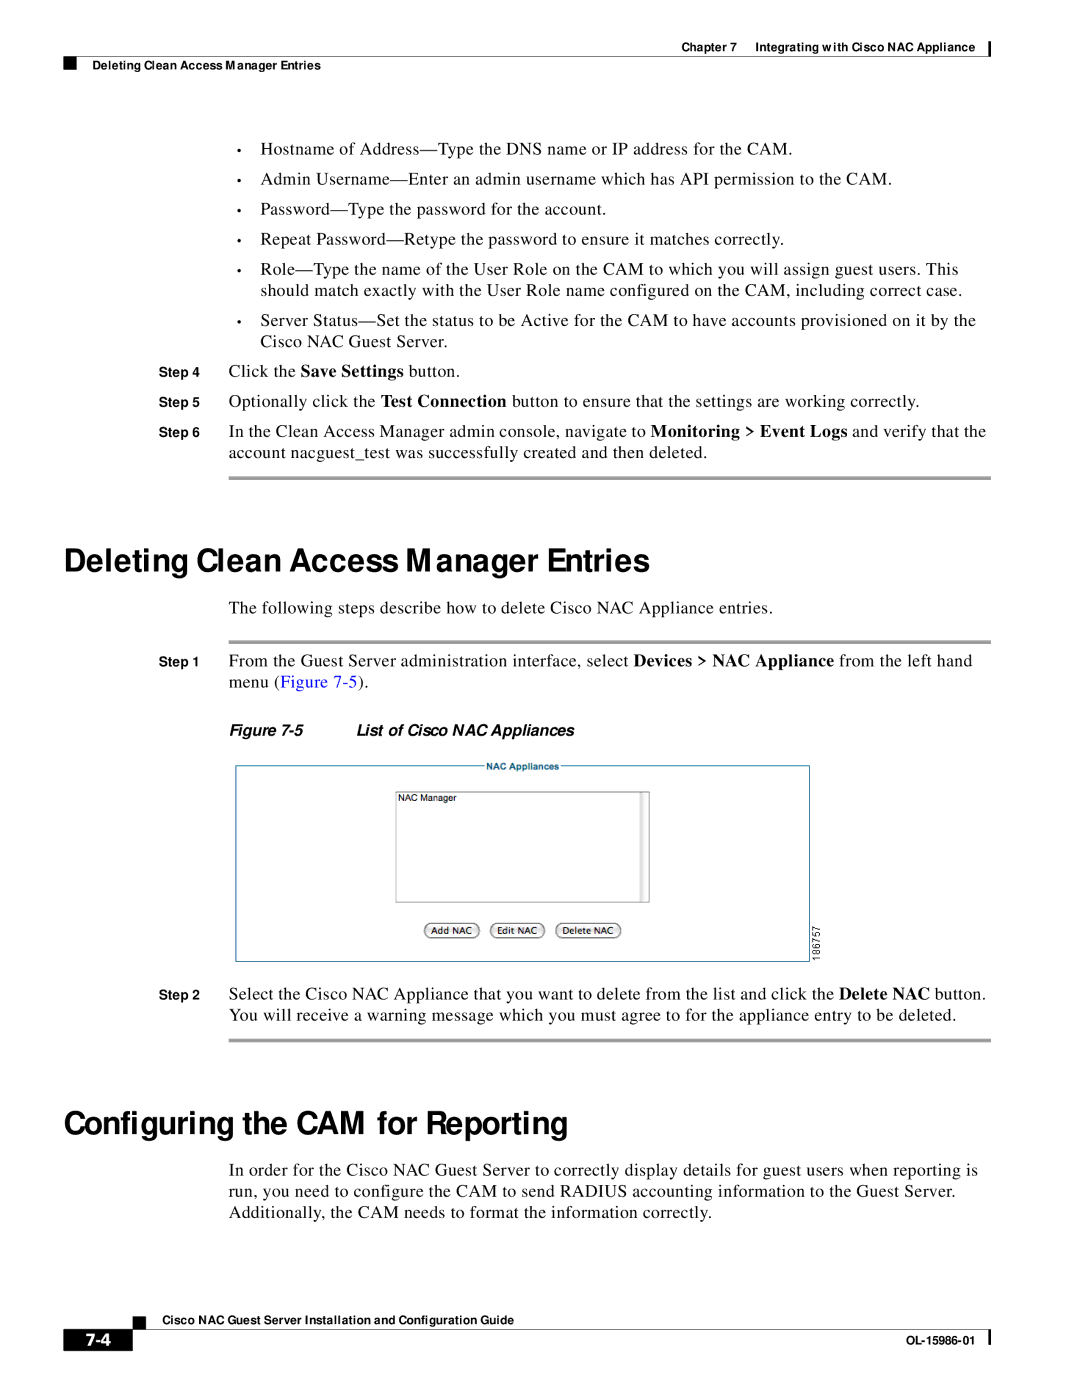 Cisco Systems OL-15986-01 manual Deleting Clean Access Manager Entries, Configuring the CAM for Reporting 